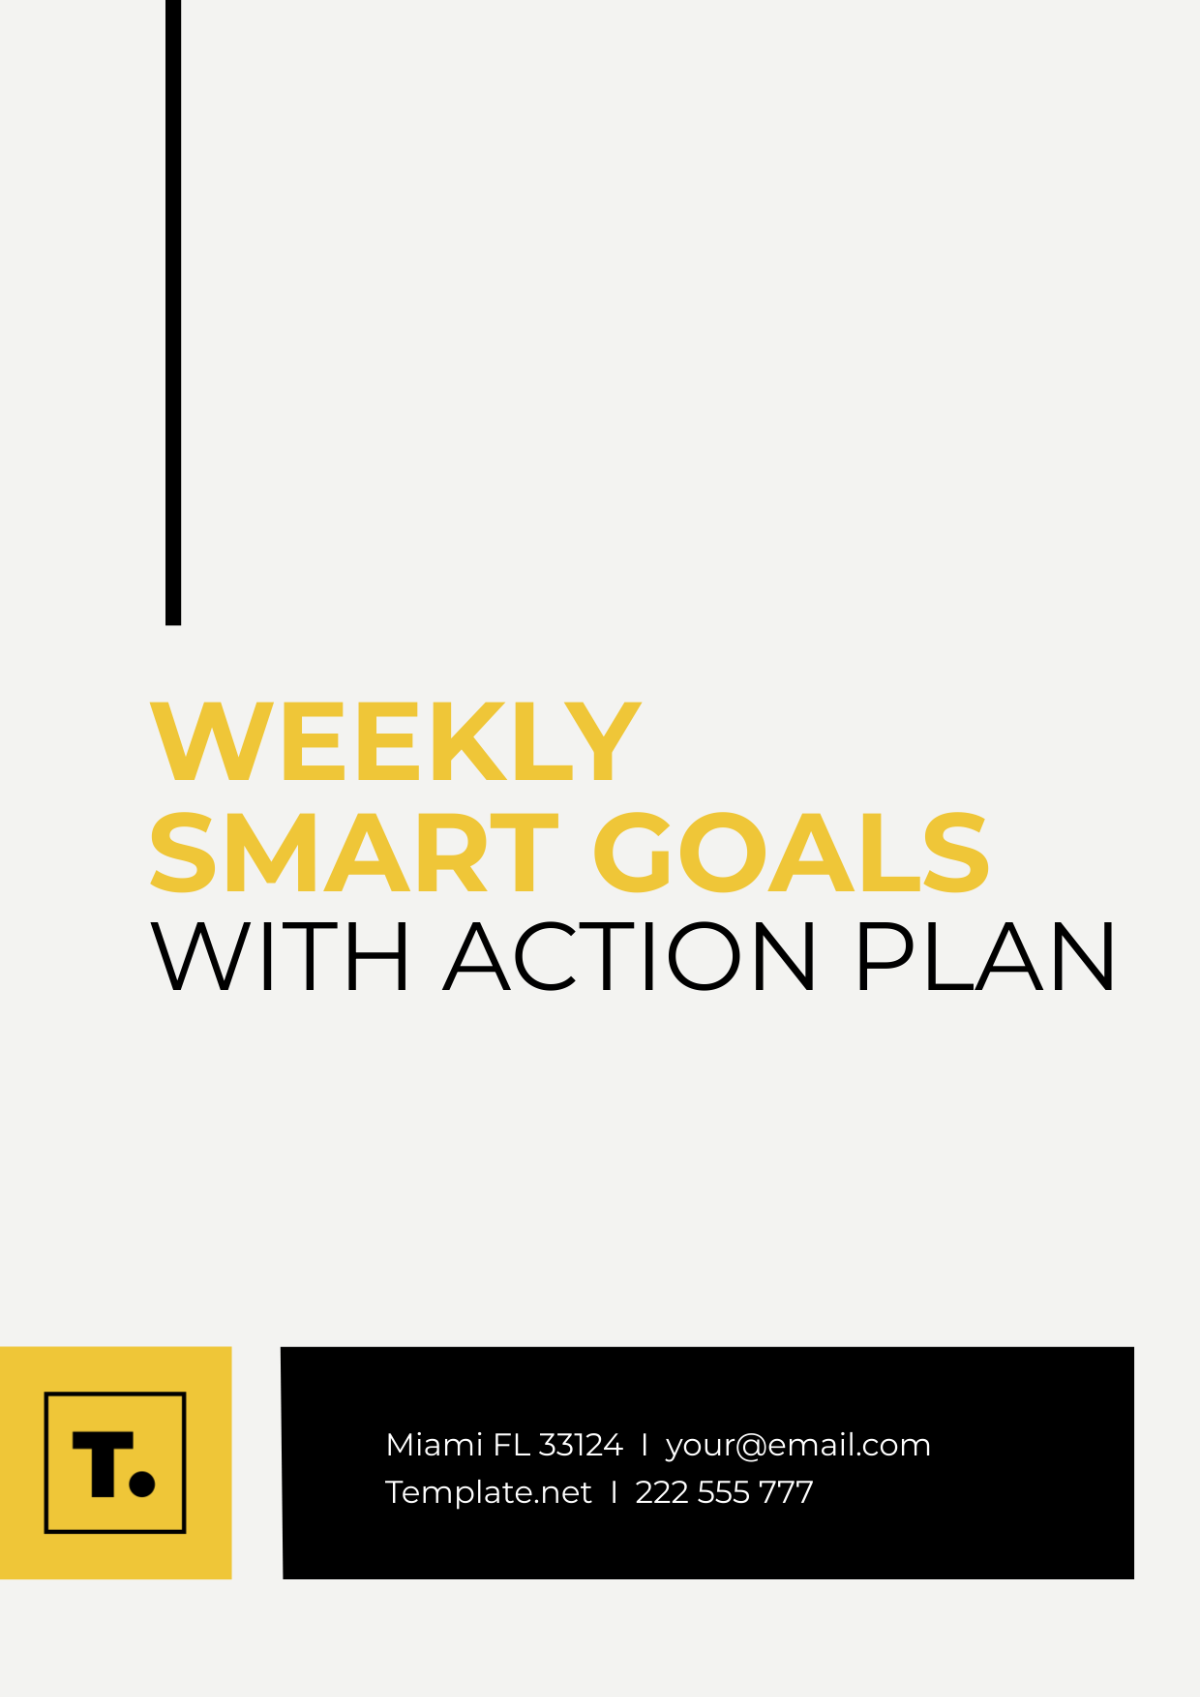 Weekly SMART Goals with Action Plan Template